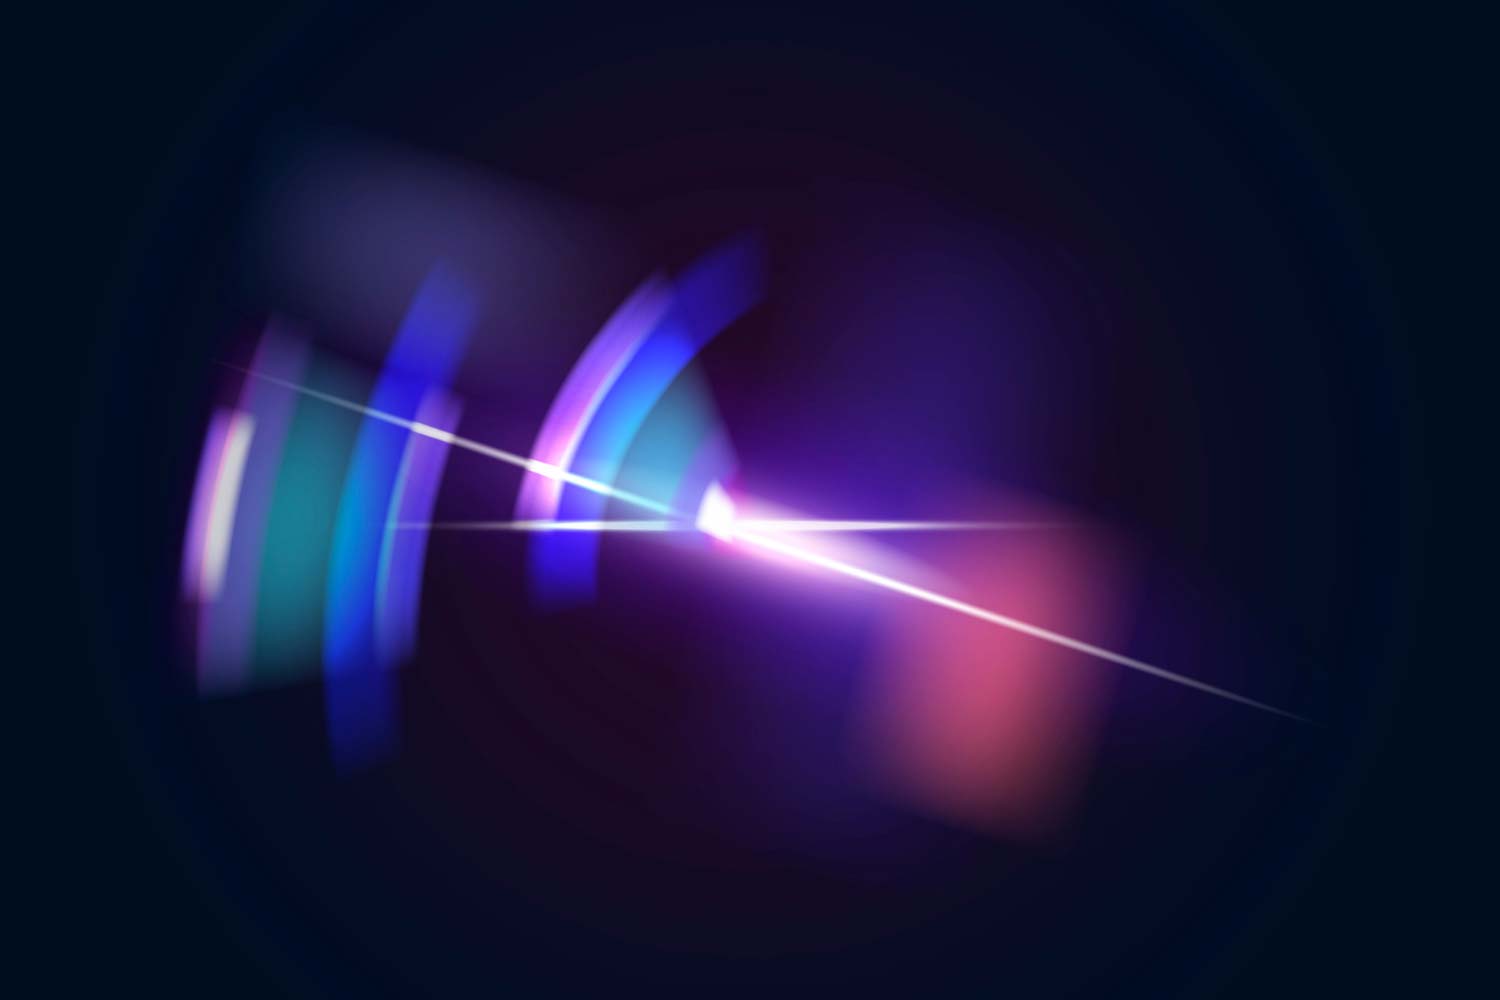 New approach overcomes long-standing limitations in optics